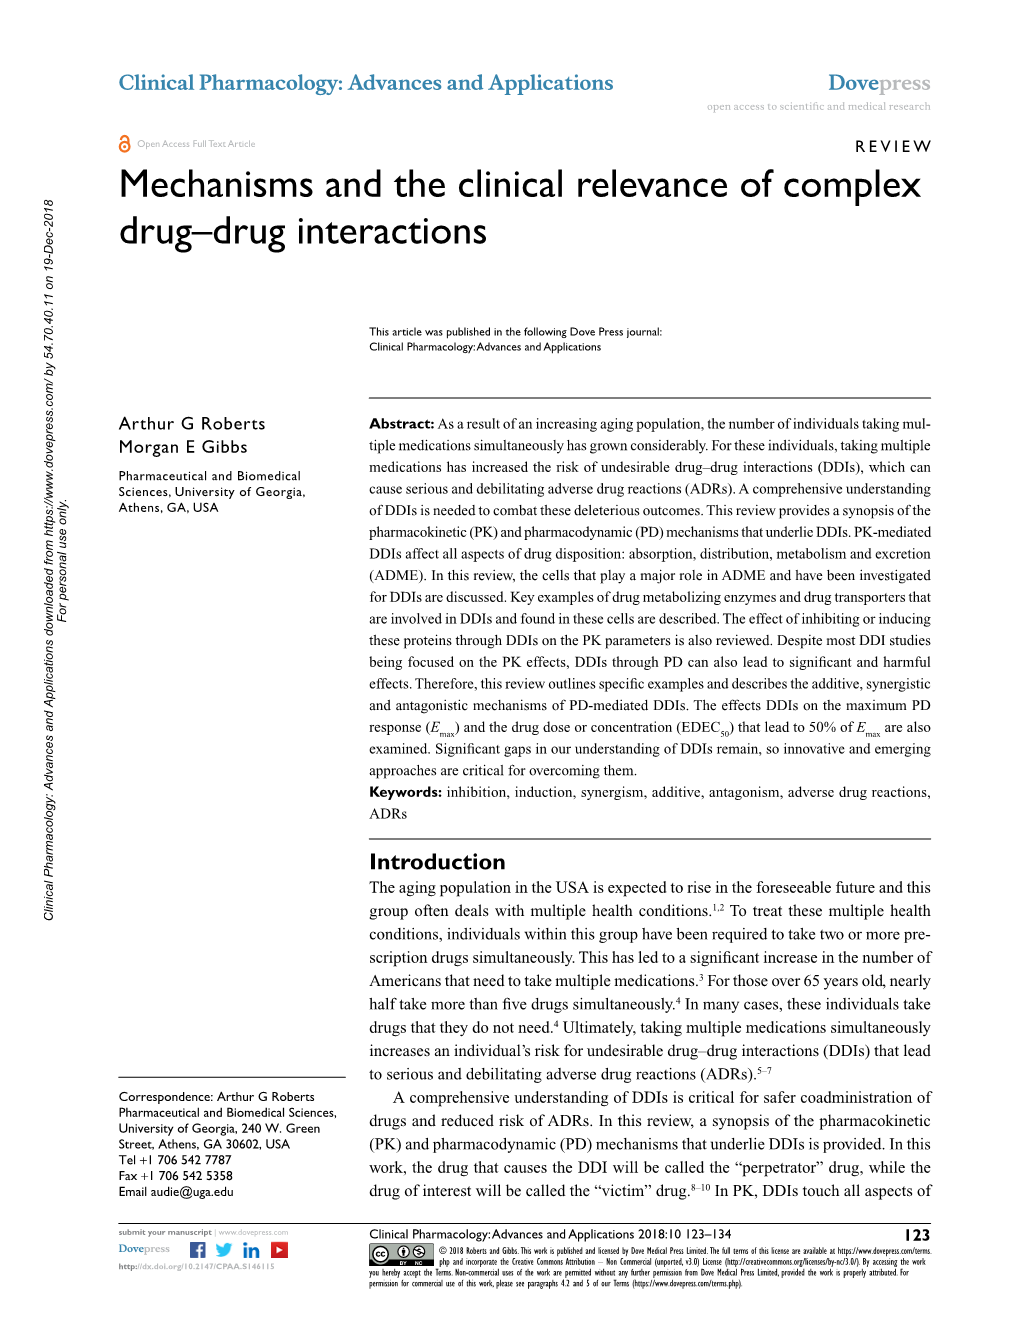 Mechanisms and the Clinical Relevance of Complex Drug–Drug Interactions